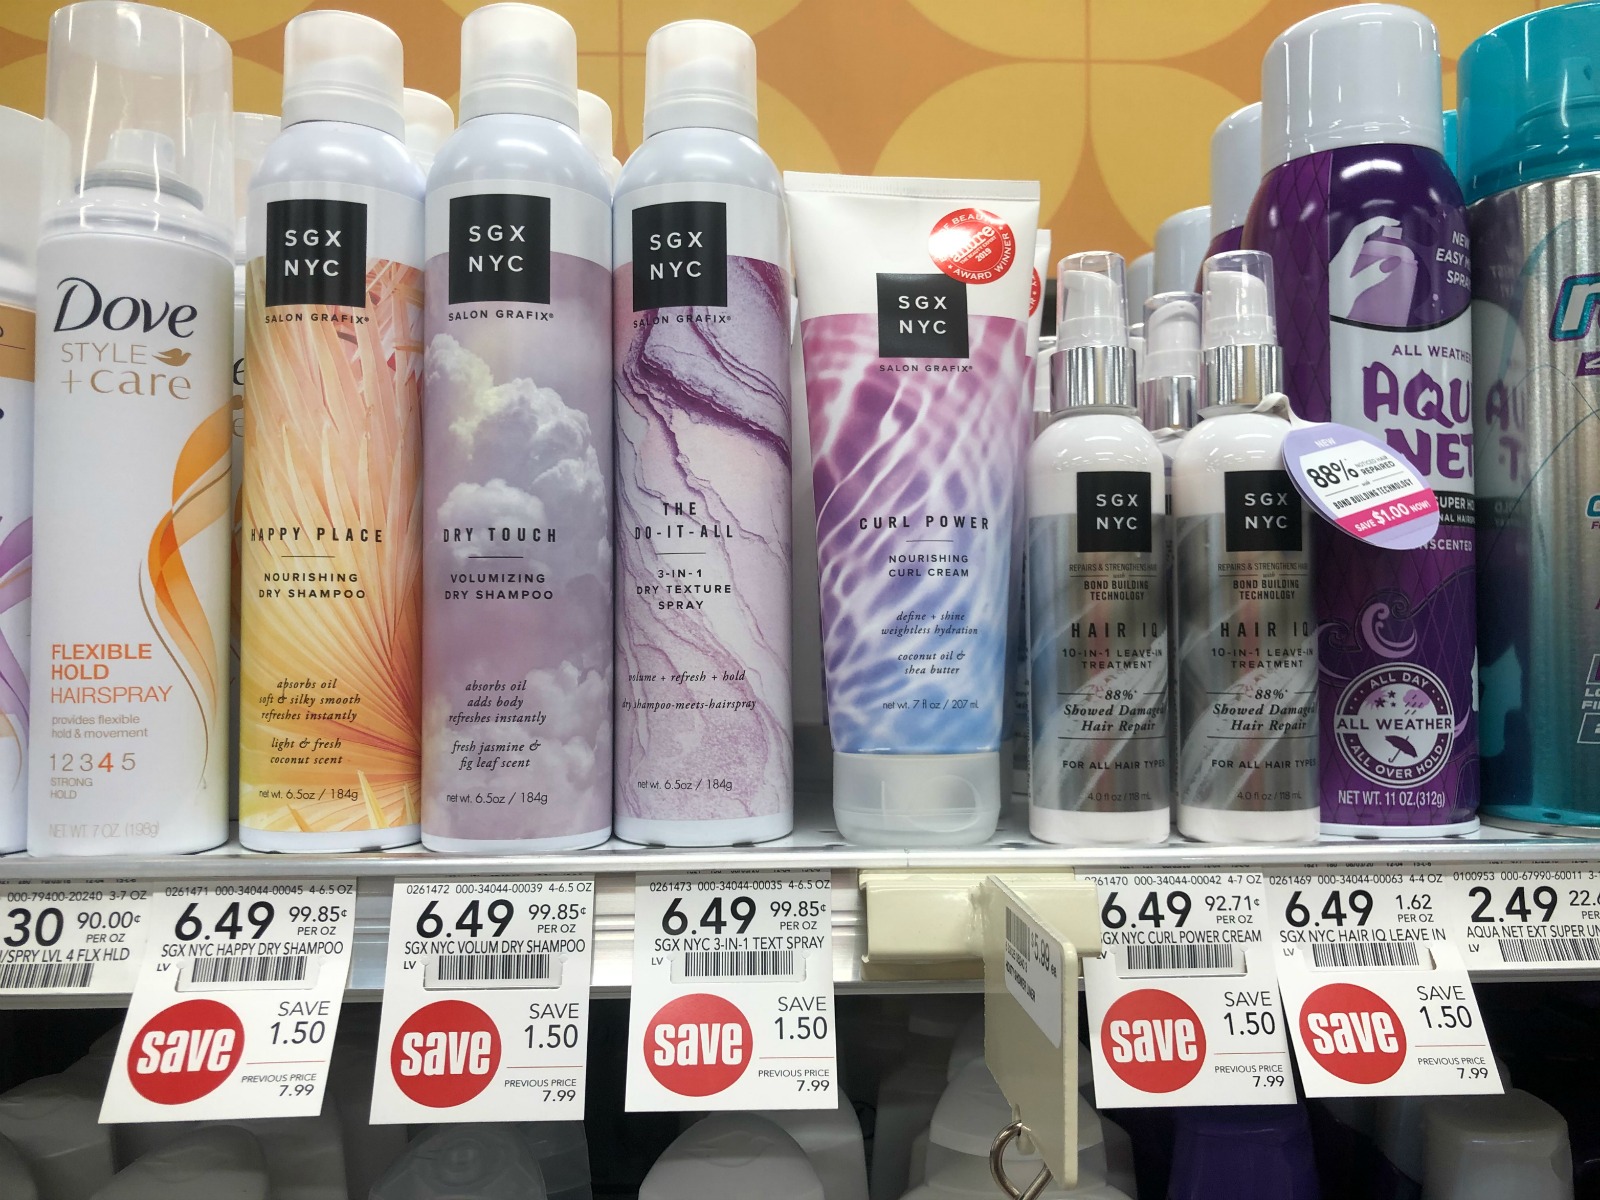 Save $2 On All Your Favorite SGX NYC Haircare Items At Publix! on I Heart Publix